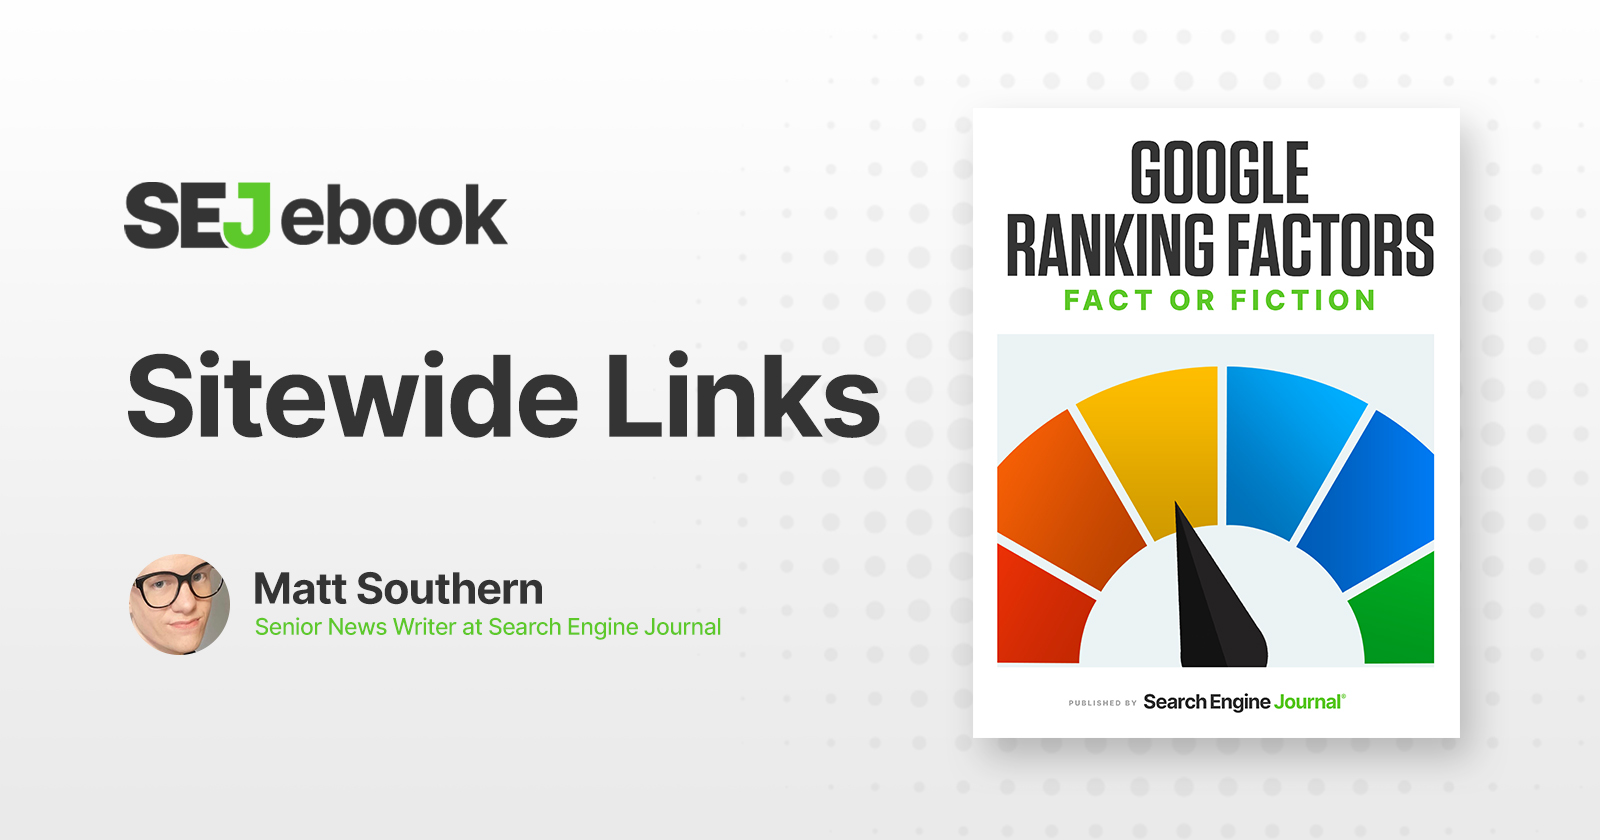 Are Sitewide Links A Google Ranking Factor? via @sejournal, @MattGSouthern